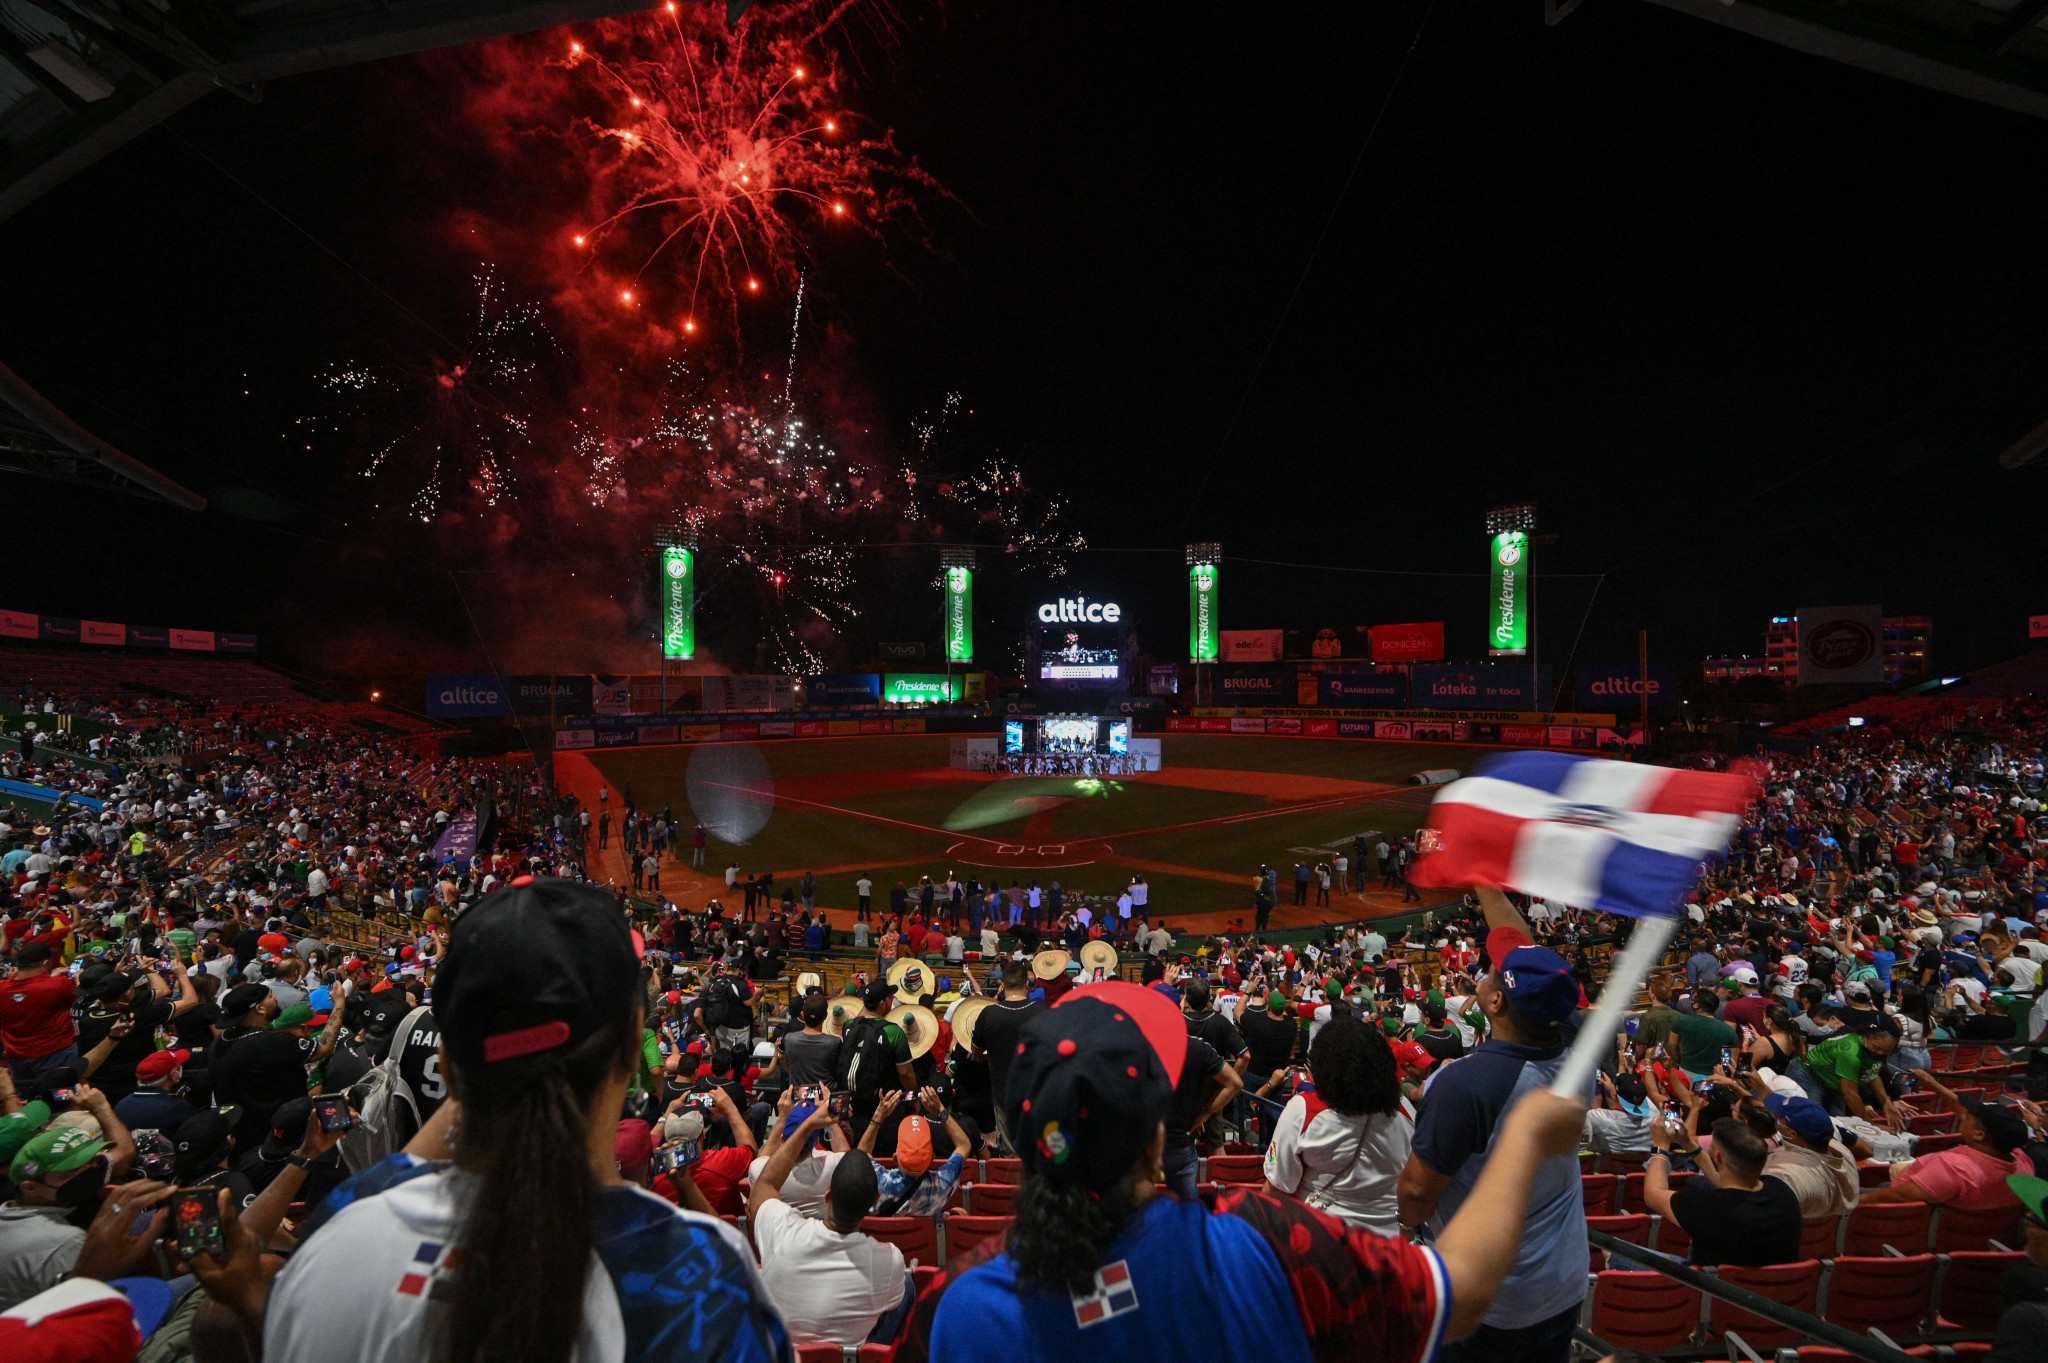 Santo Domingo has been announced as the host for the 2026 Central American and Caribbean Games ©Centro Caribe Sports